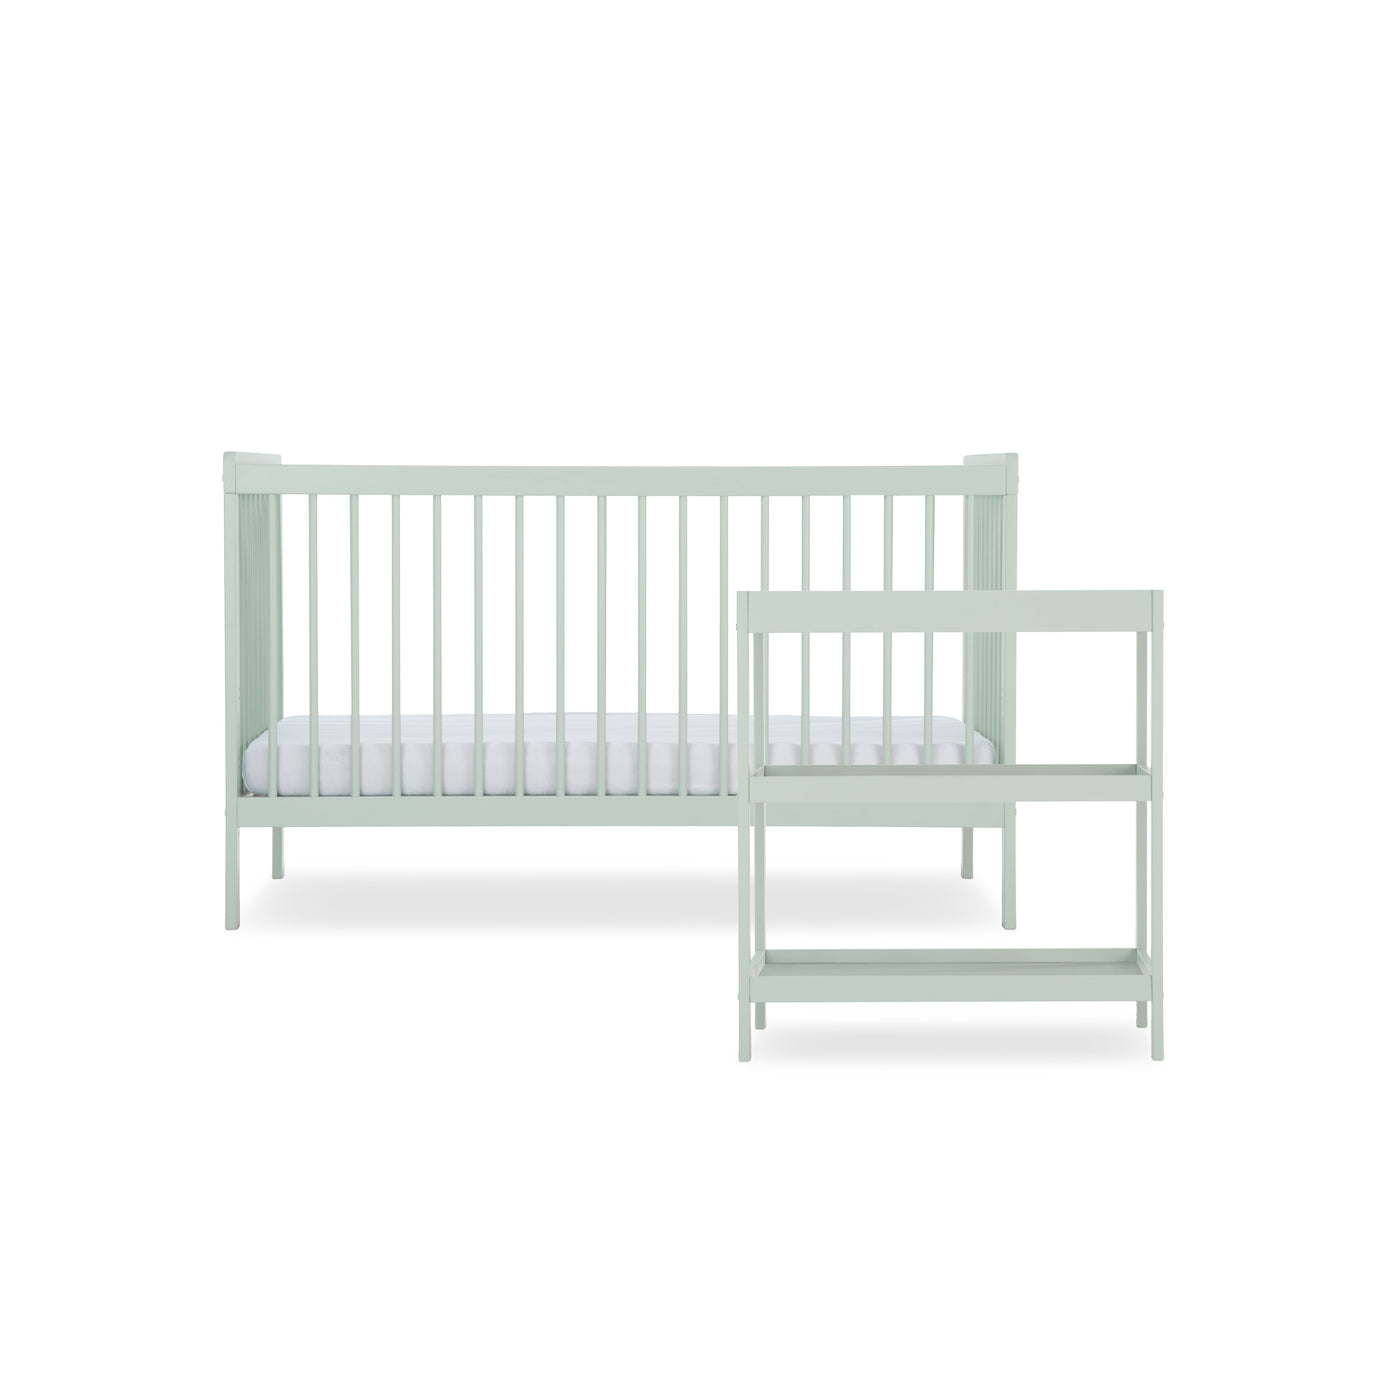 CuddleCo Nola 2pc Changer and Cot Bed - Sage Green